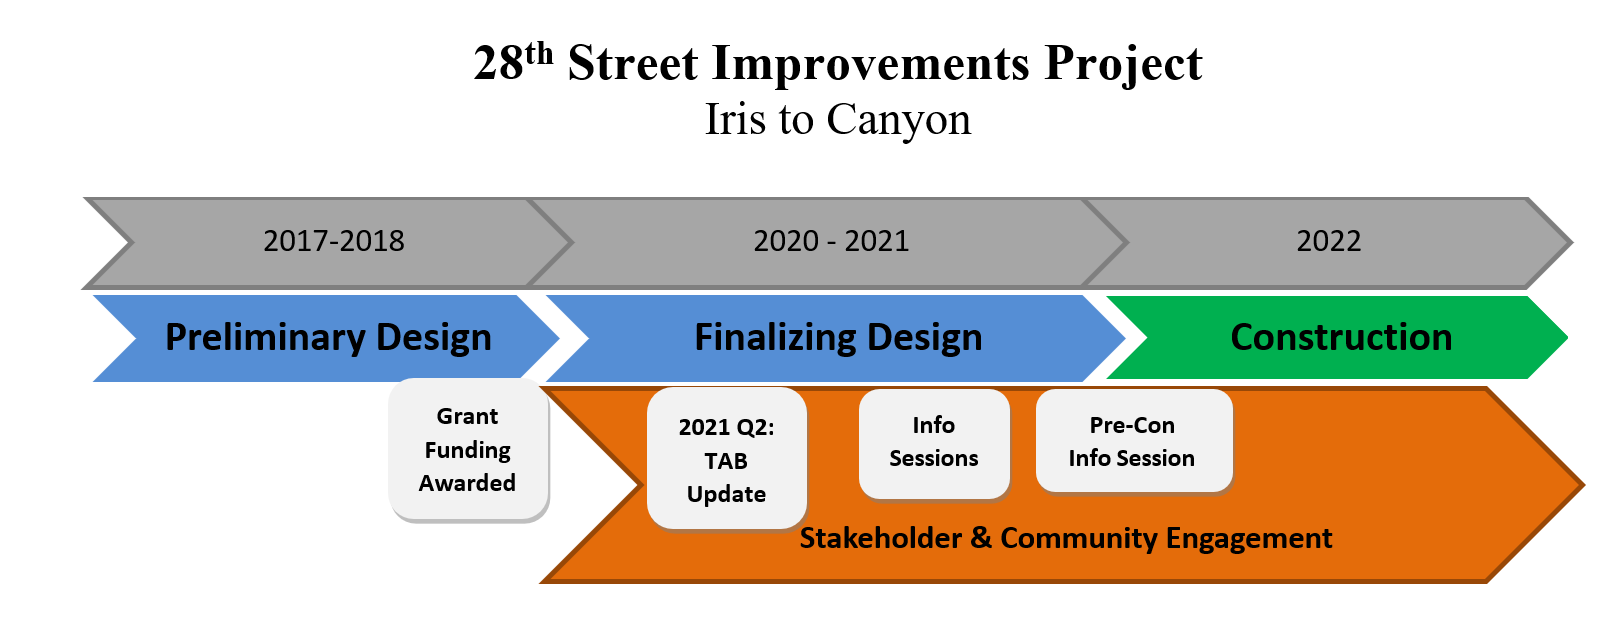 28th St Improvements Project timeline - August 2021